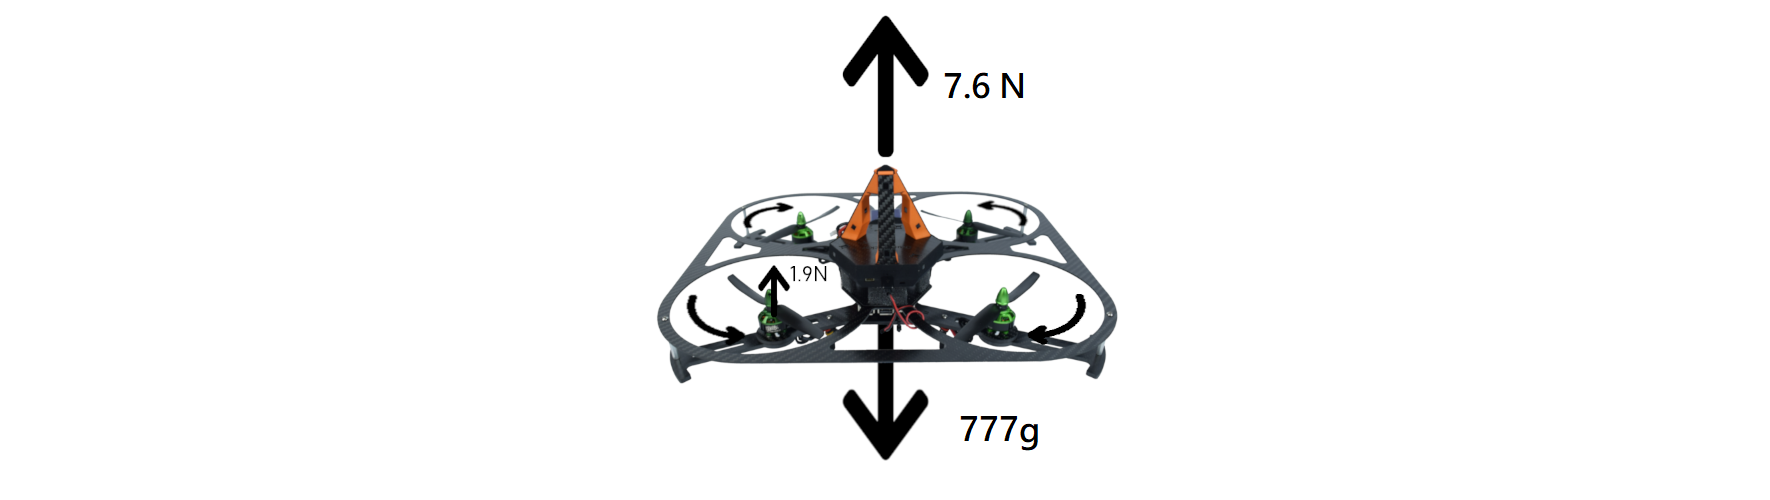 Quadcopter drone forces